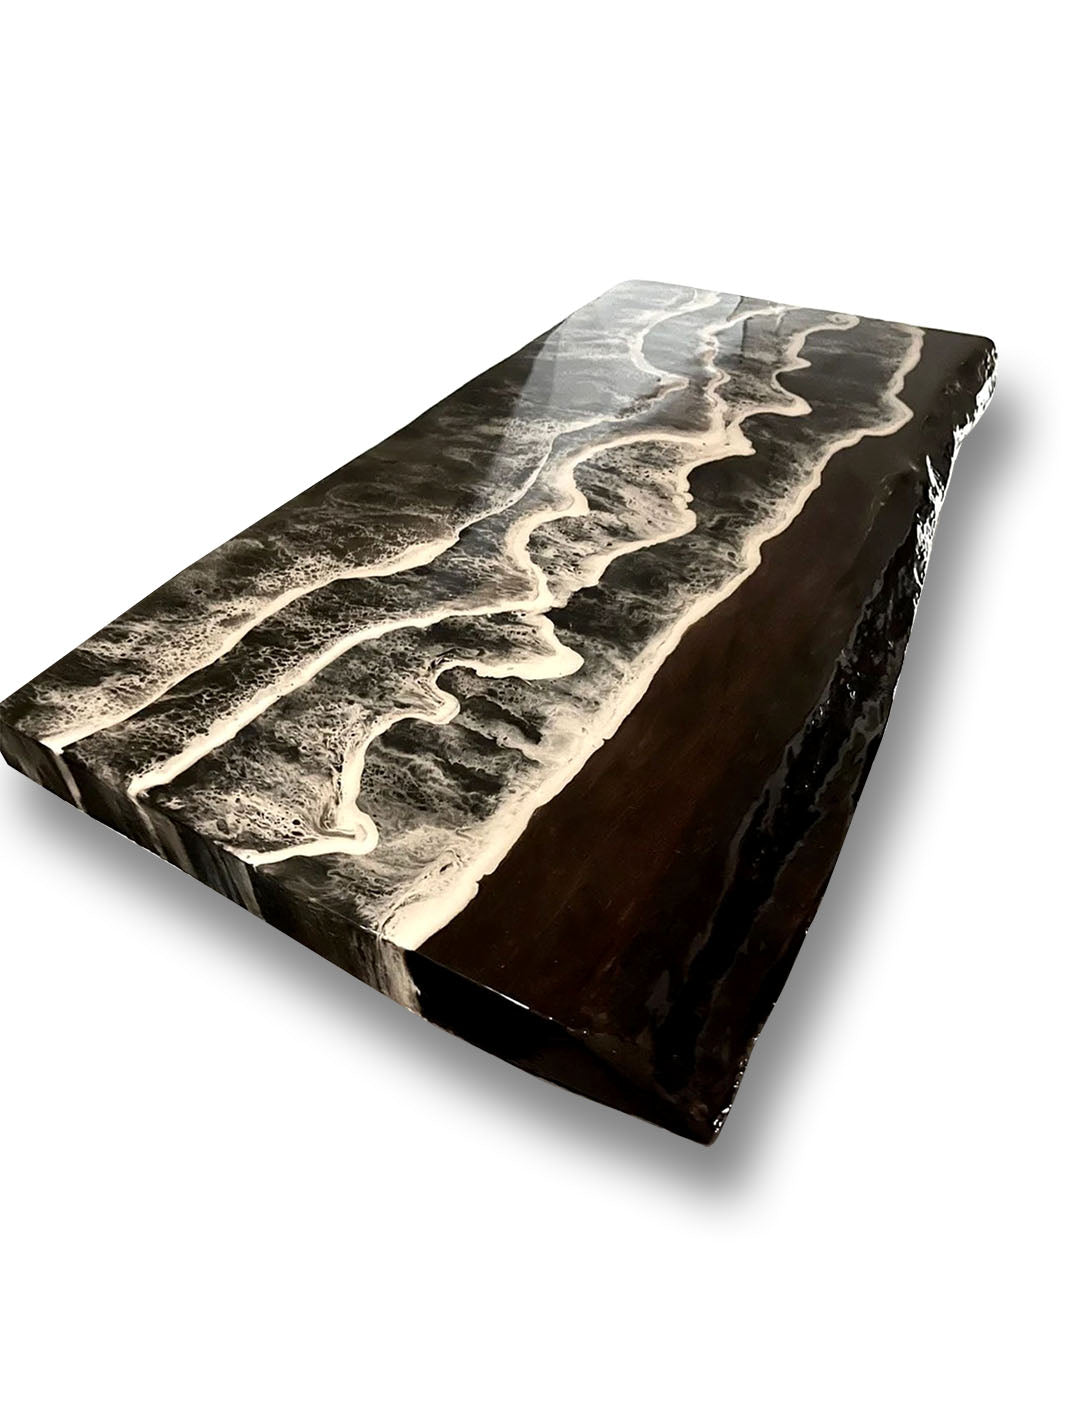 Handcrafted Beach Inspired Elongated Black River Epoxy Resin Table 84"L x 42" W